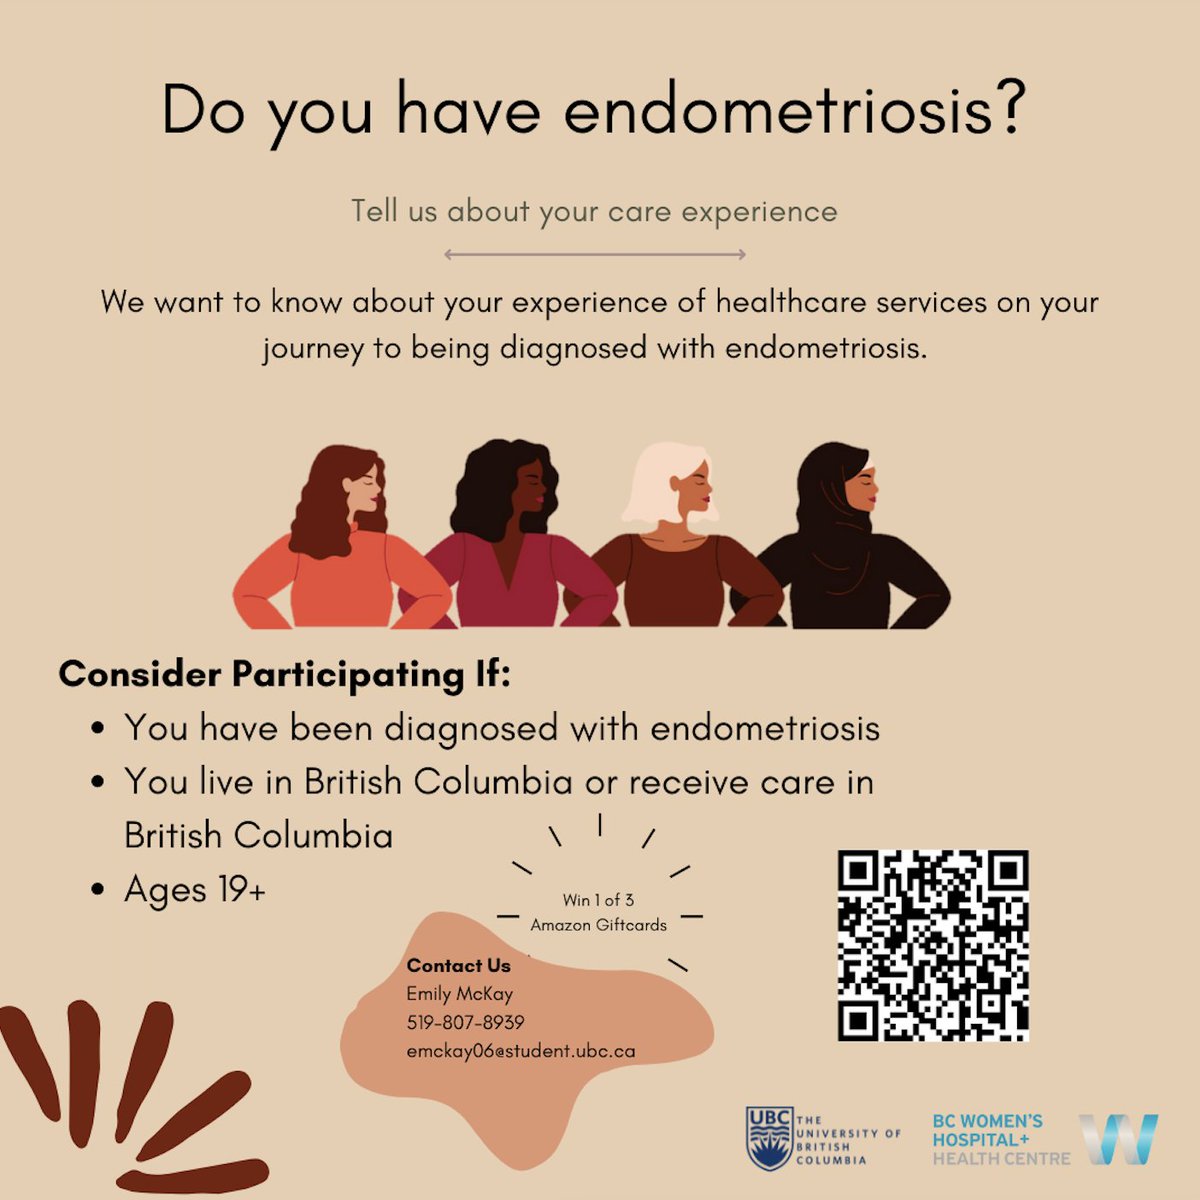 Our colleagues at @UBCNursing want to know about your experience of healthcare services along your journey to being diagnosed with endometriosis in BC. Please consider taking their survey! ow.ly/Y3mf50KAzbW